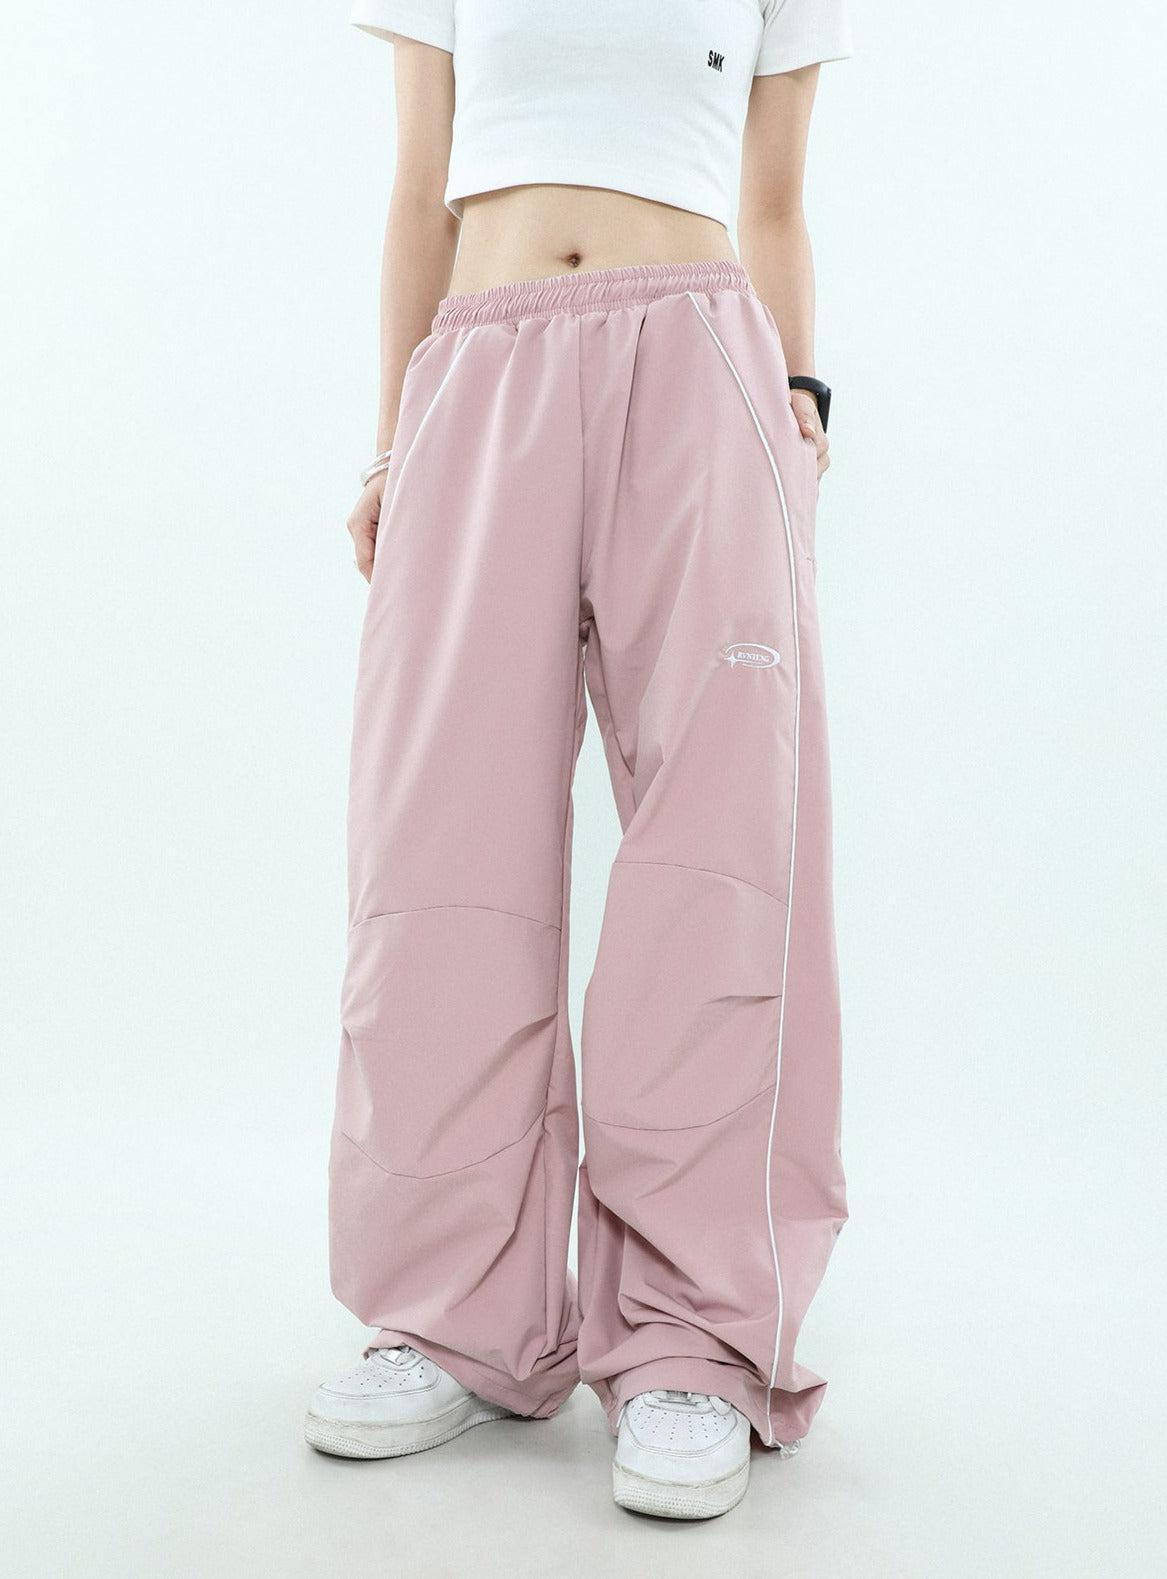 Embroidered Text Sports Pants Korean Street Fashion Pants By Mr Nearly Shop Online at OH Vault